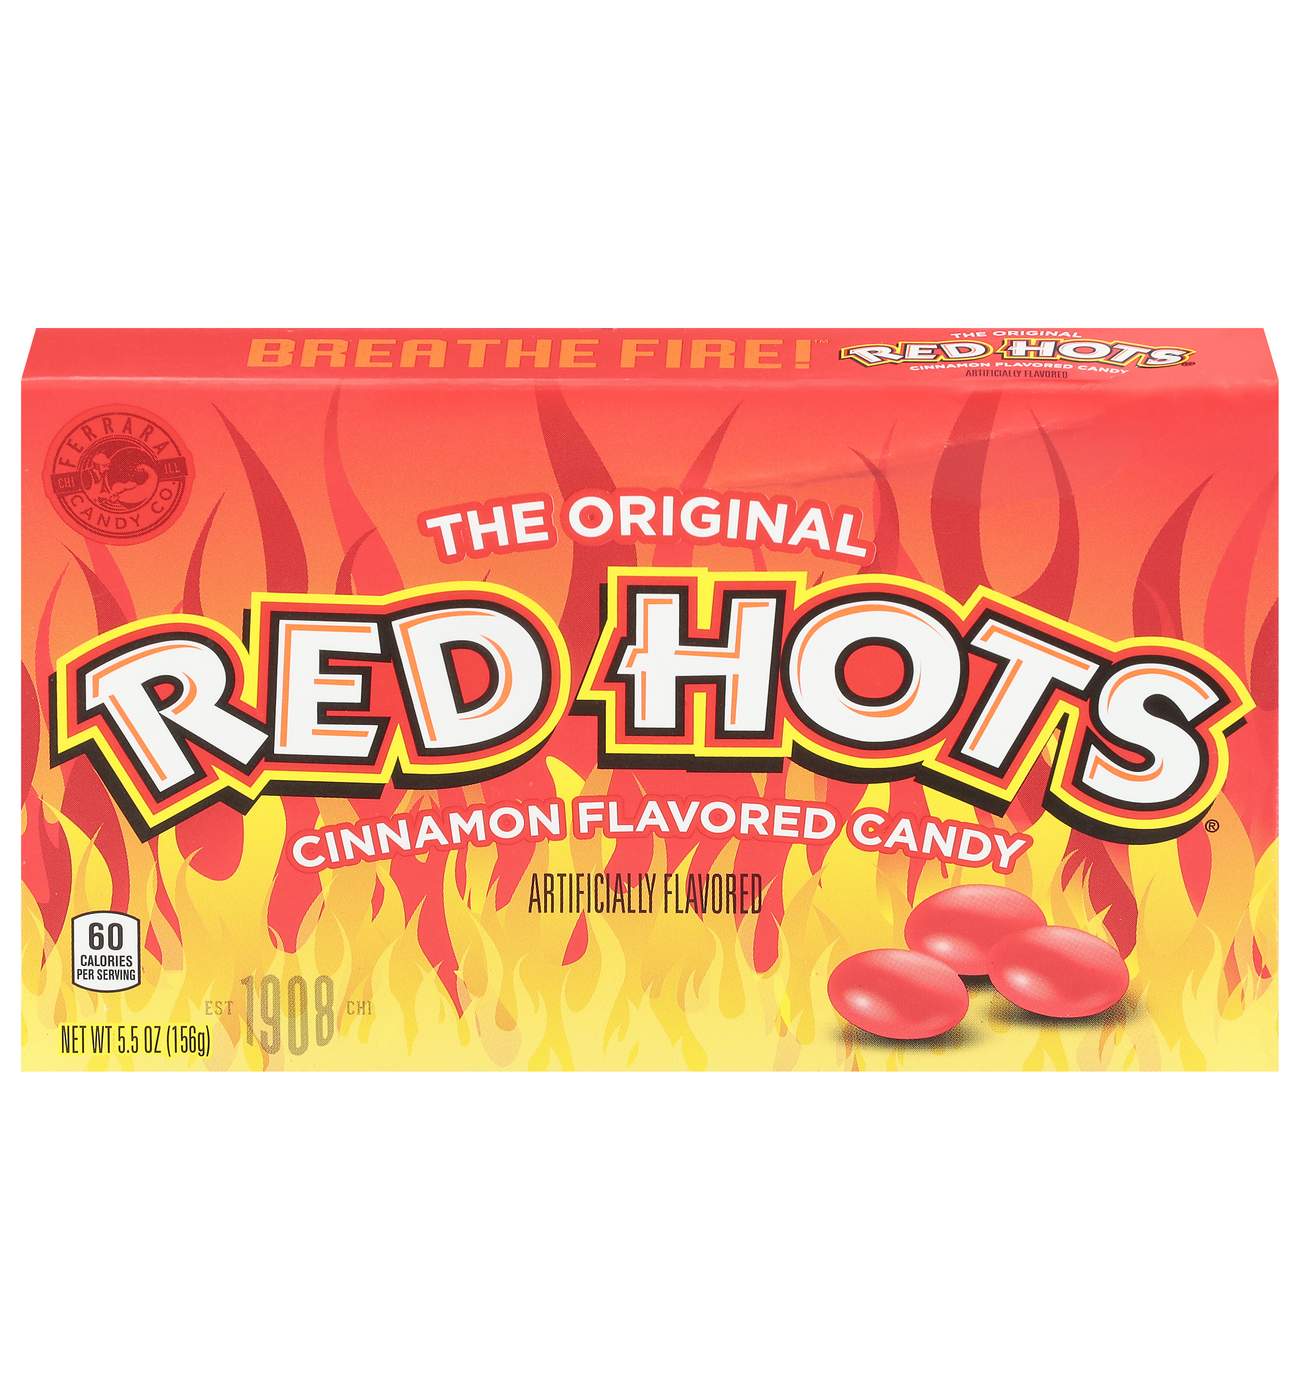 Red Hots Cinnamon Flavor Candy Theater Box; image 1 of 2